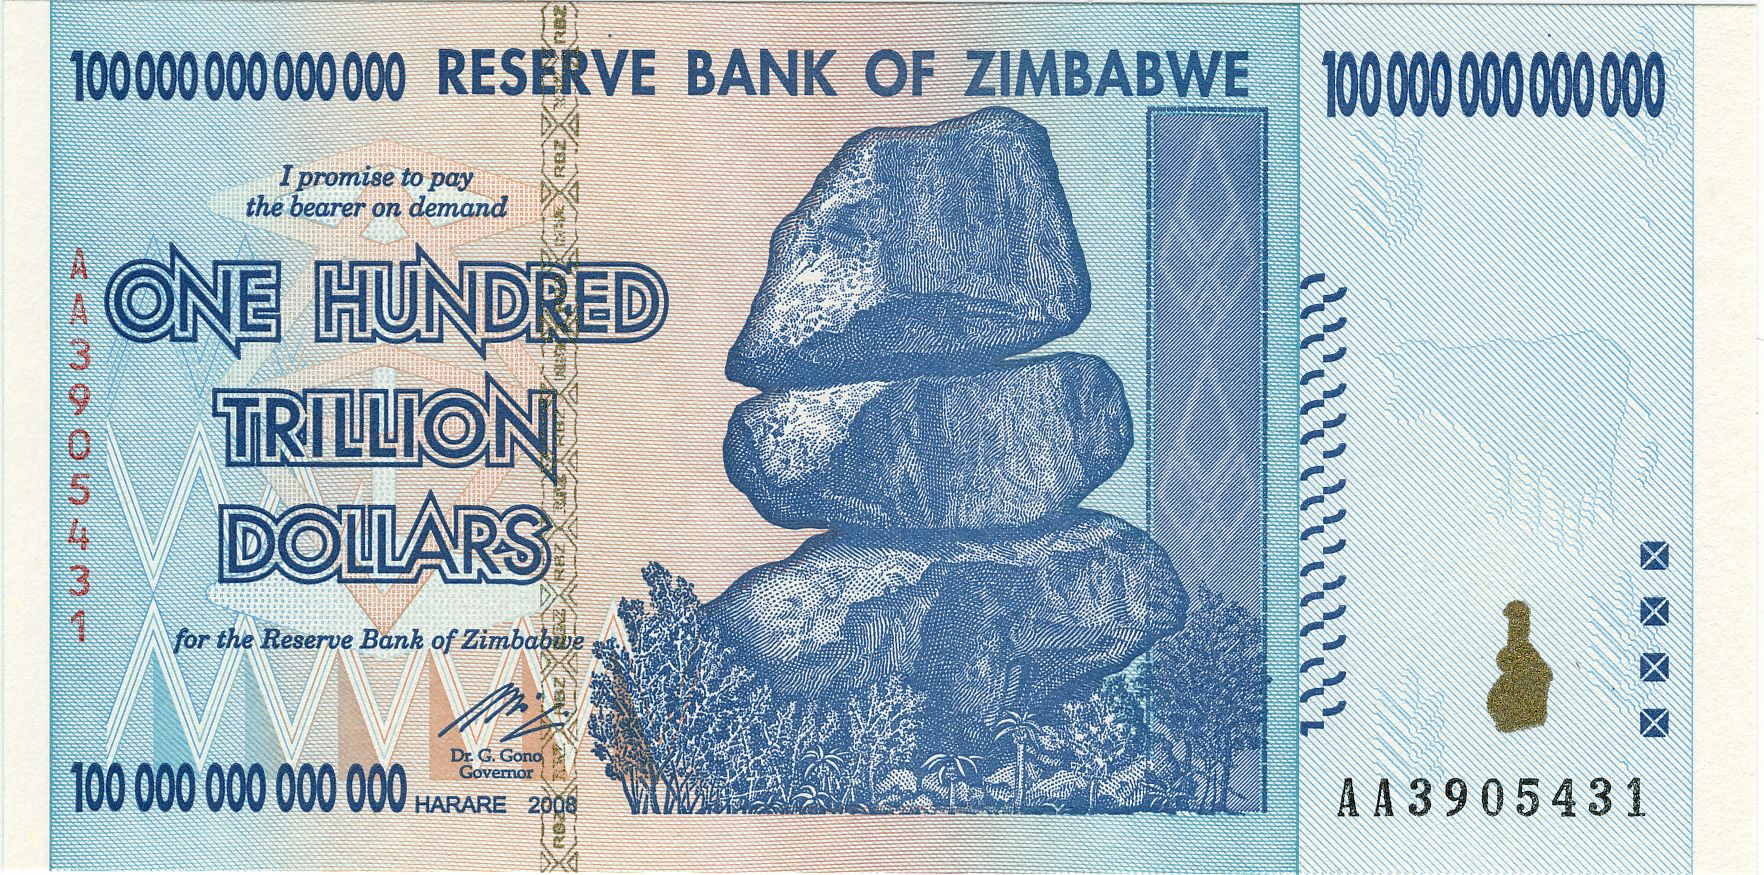 The 100 trillion dollar bank note that is nearly worthless